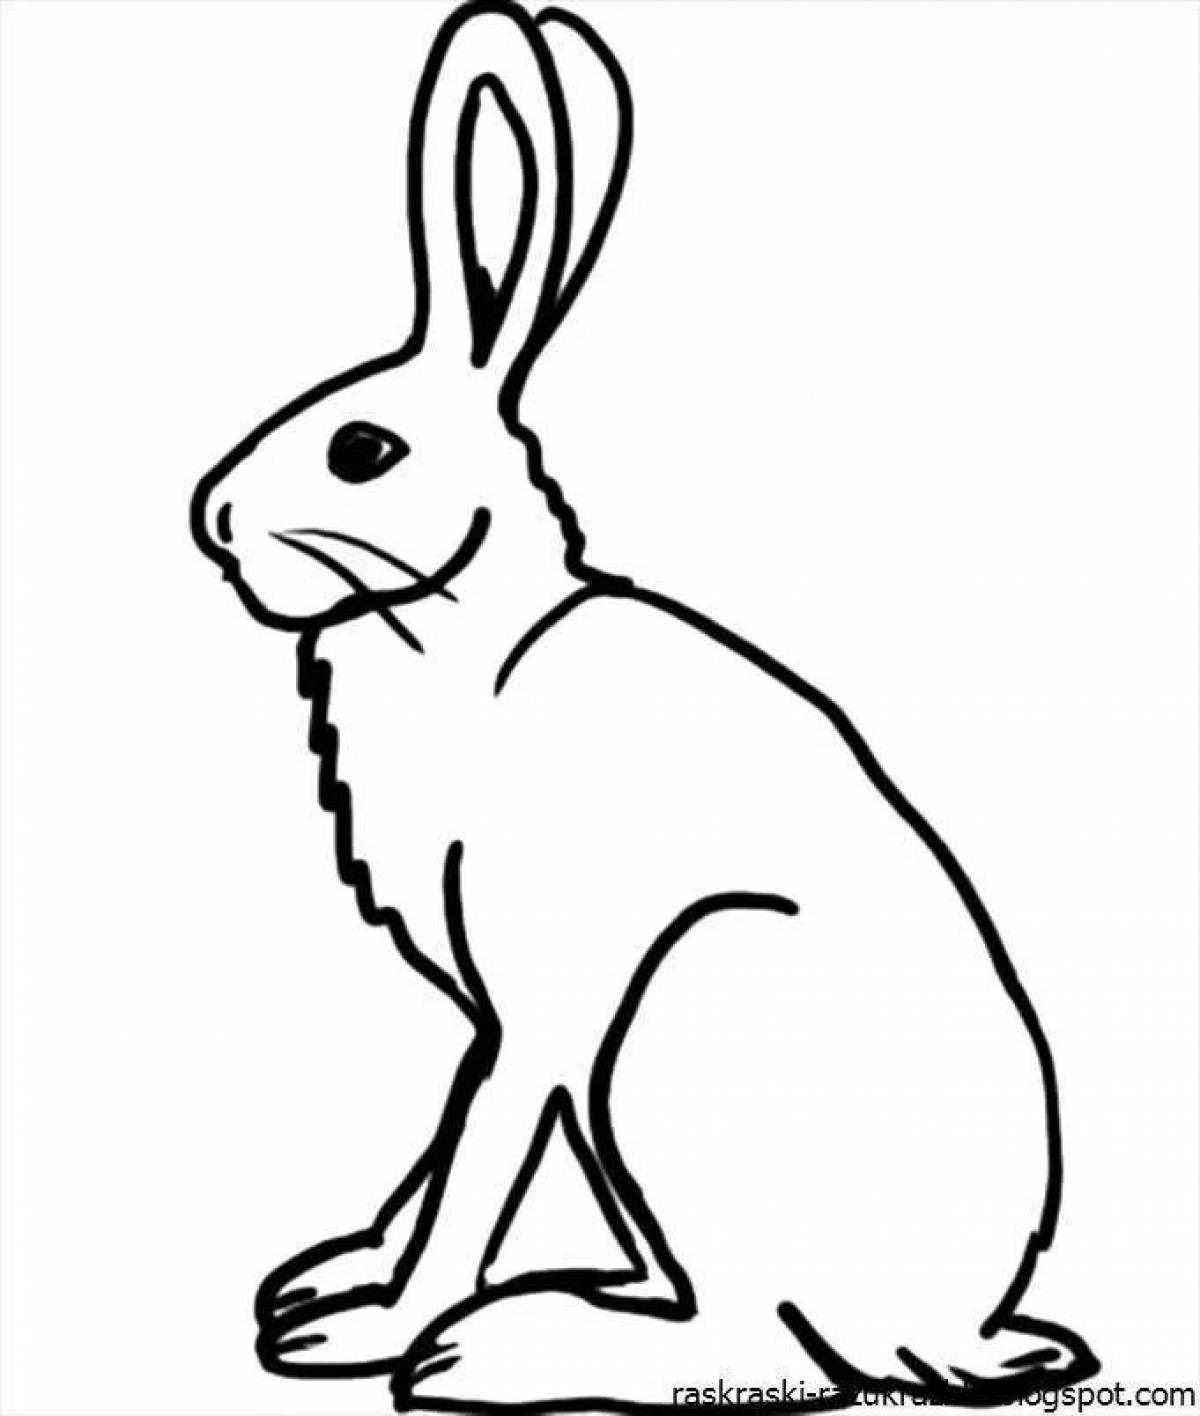 Animated drawing of a hare